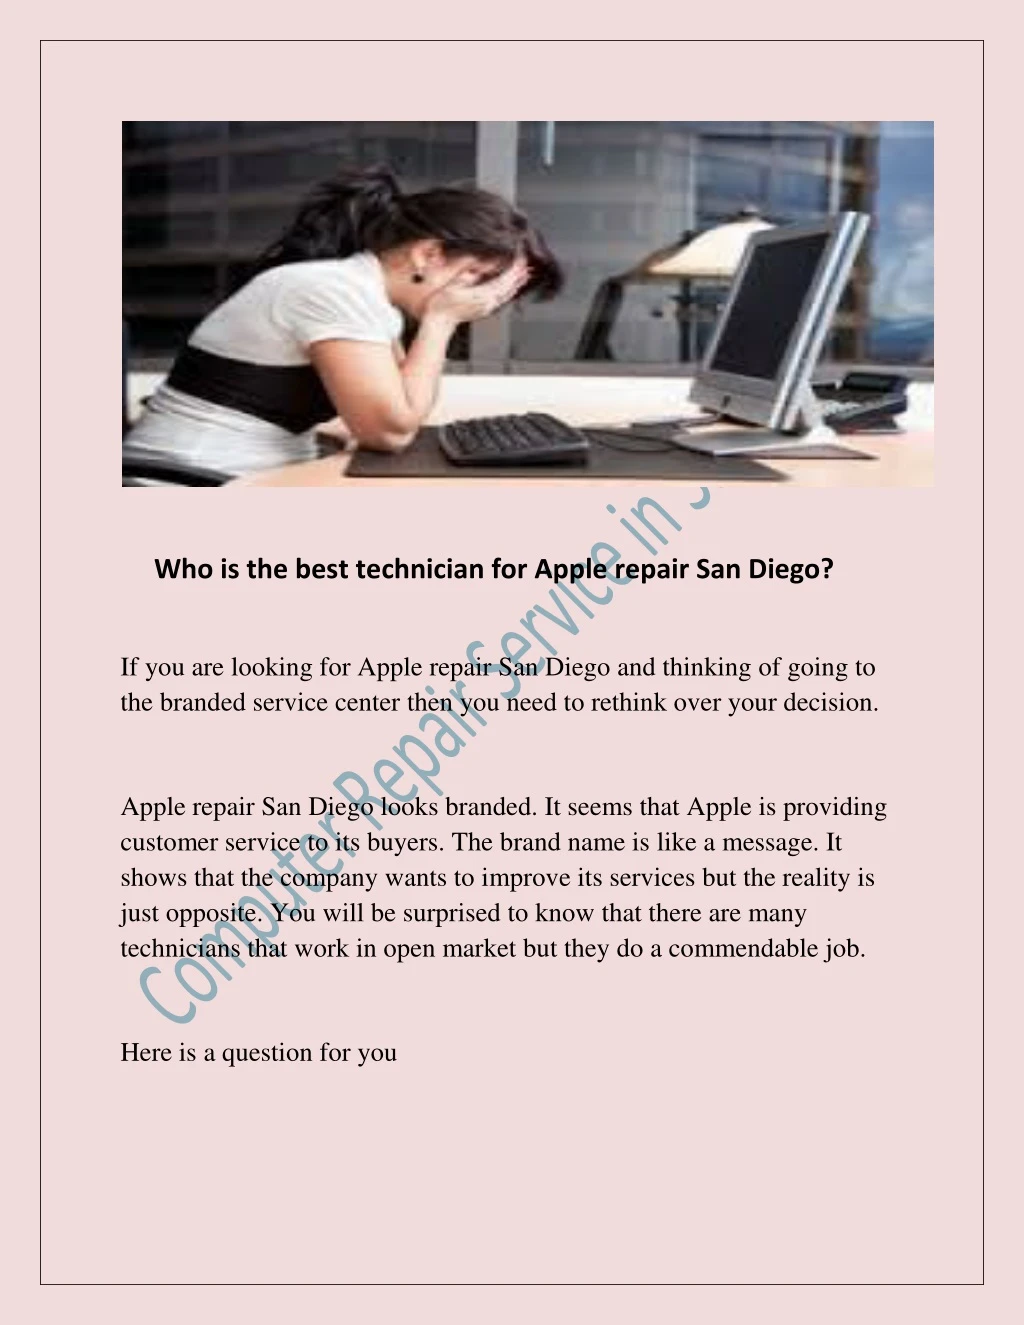 who is the best technician for apple repair